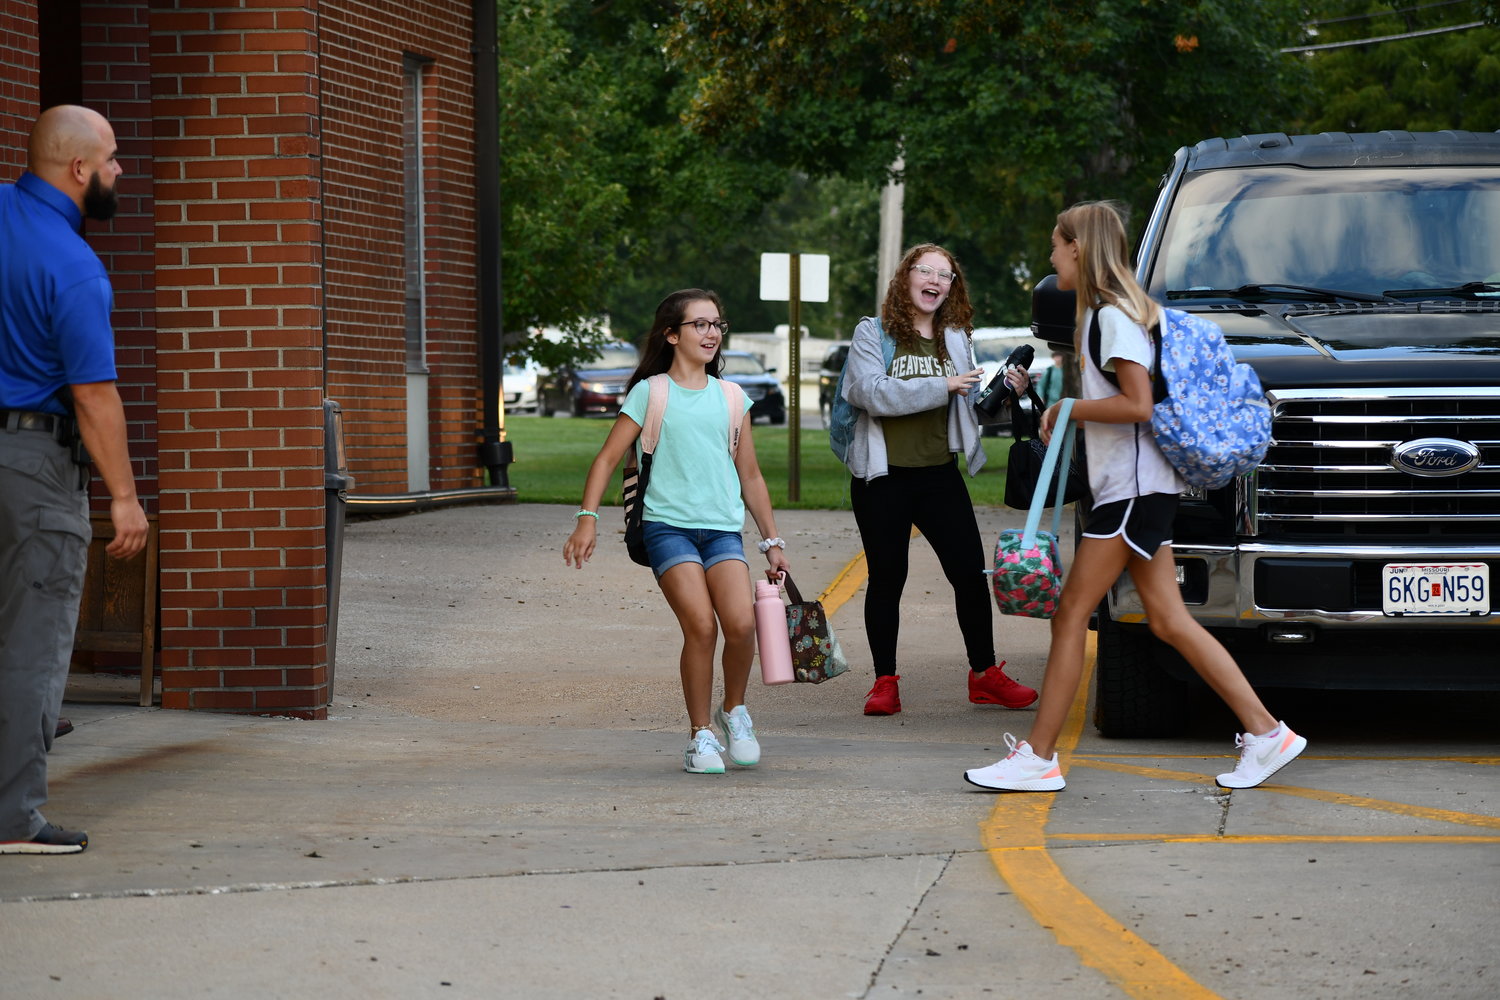 Tuesday morning, Bolivar Middle School welcomed back the sixth, seventh and eighth grade students. Cars bumper to bumper, students finding friends, being greeted by familiar faces, buses unloading, are all signs that the 2022-23 school year is underway.